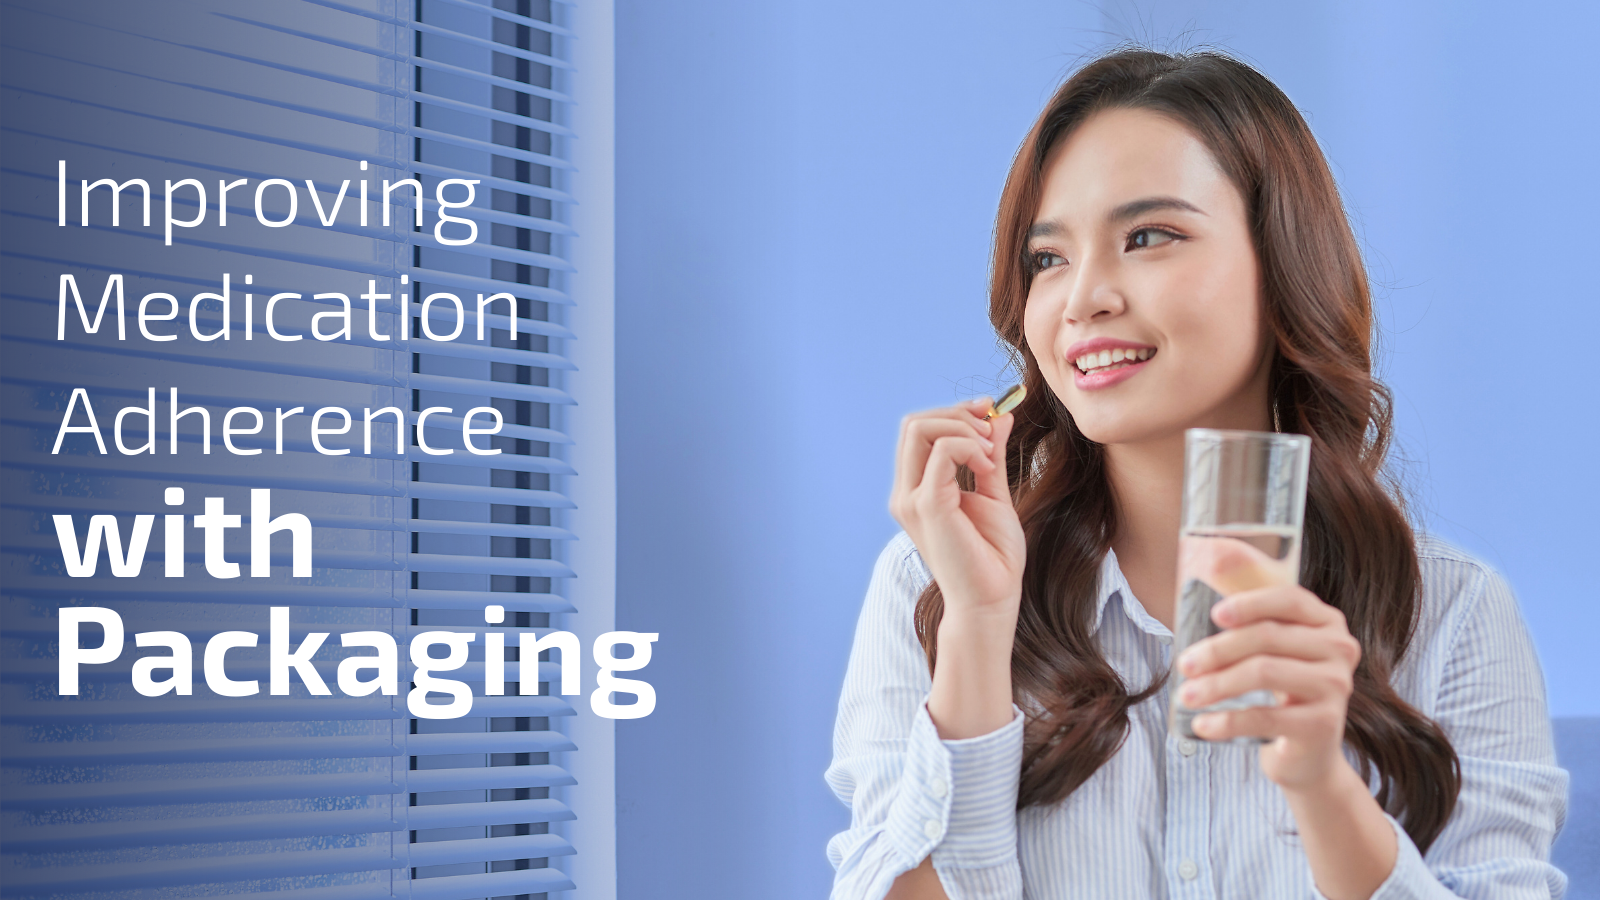 Improving Medication Adherence with Packaging